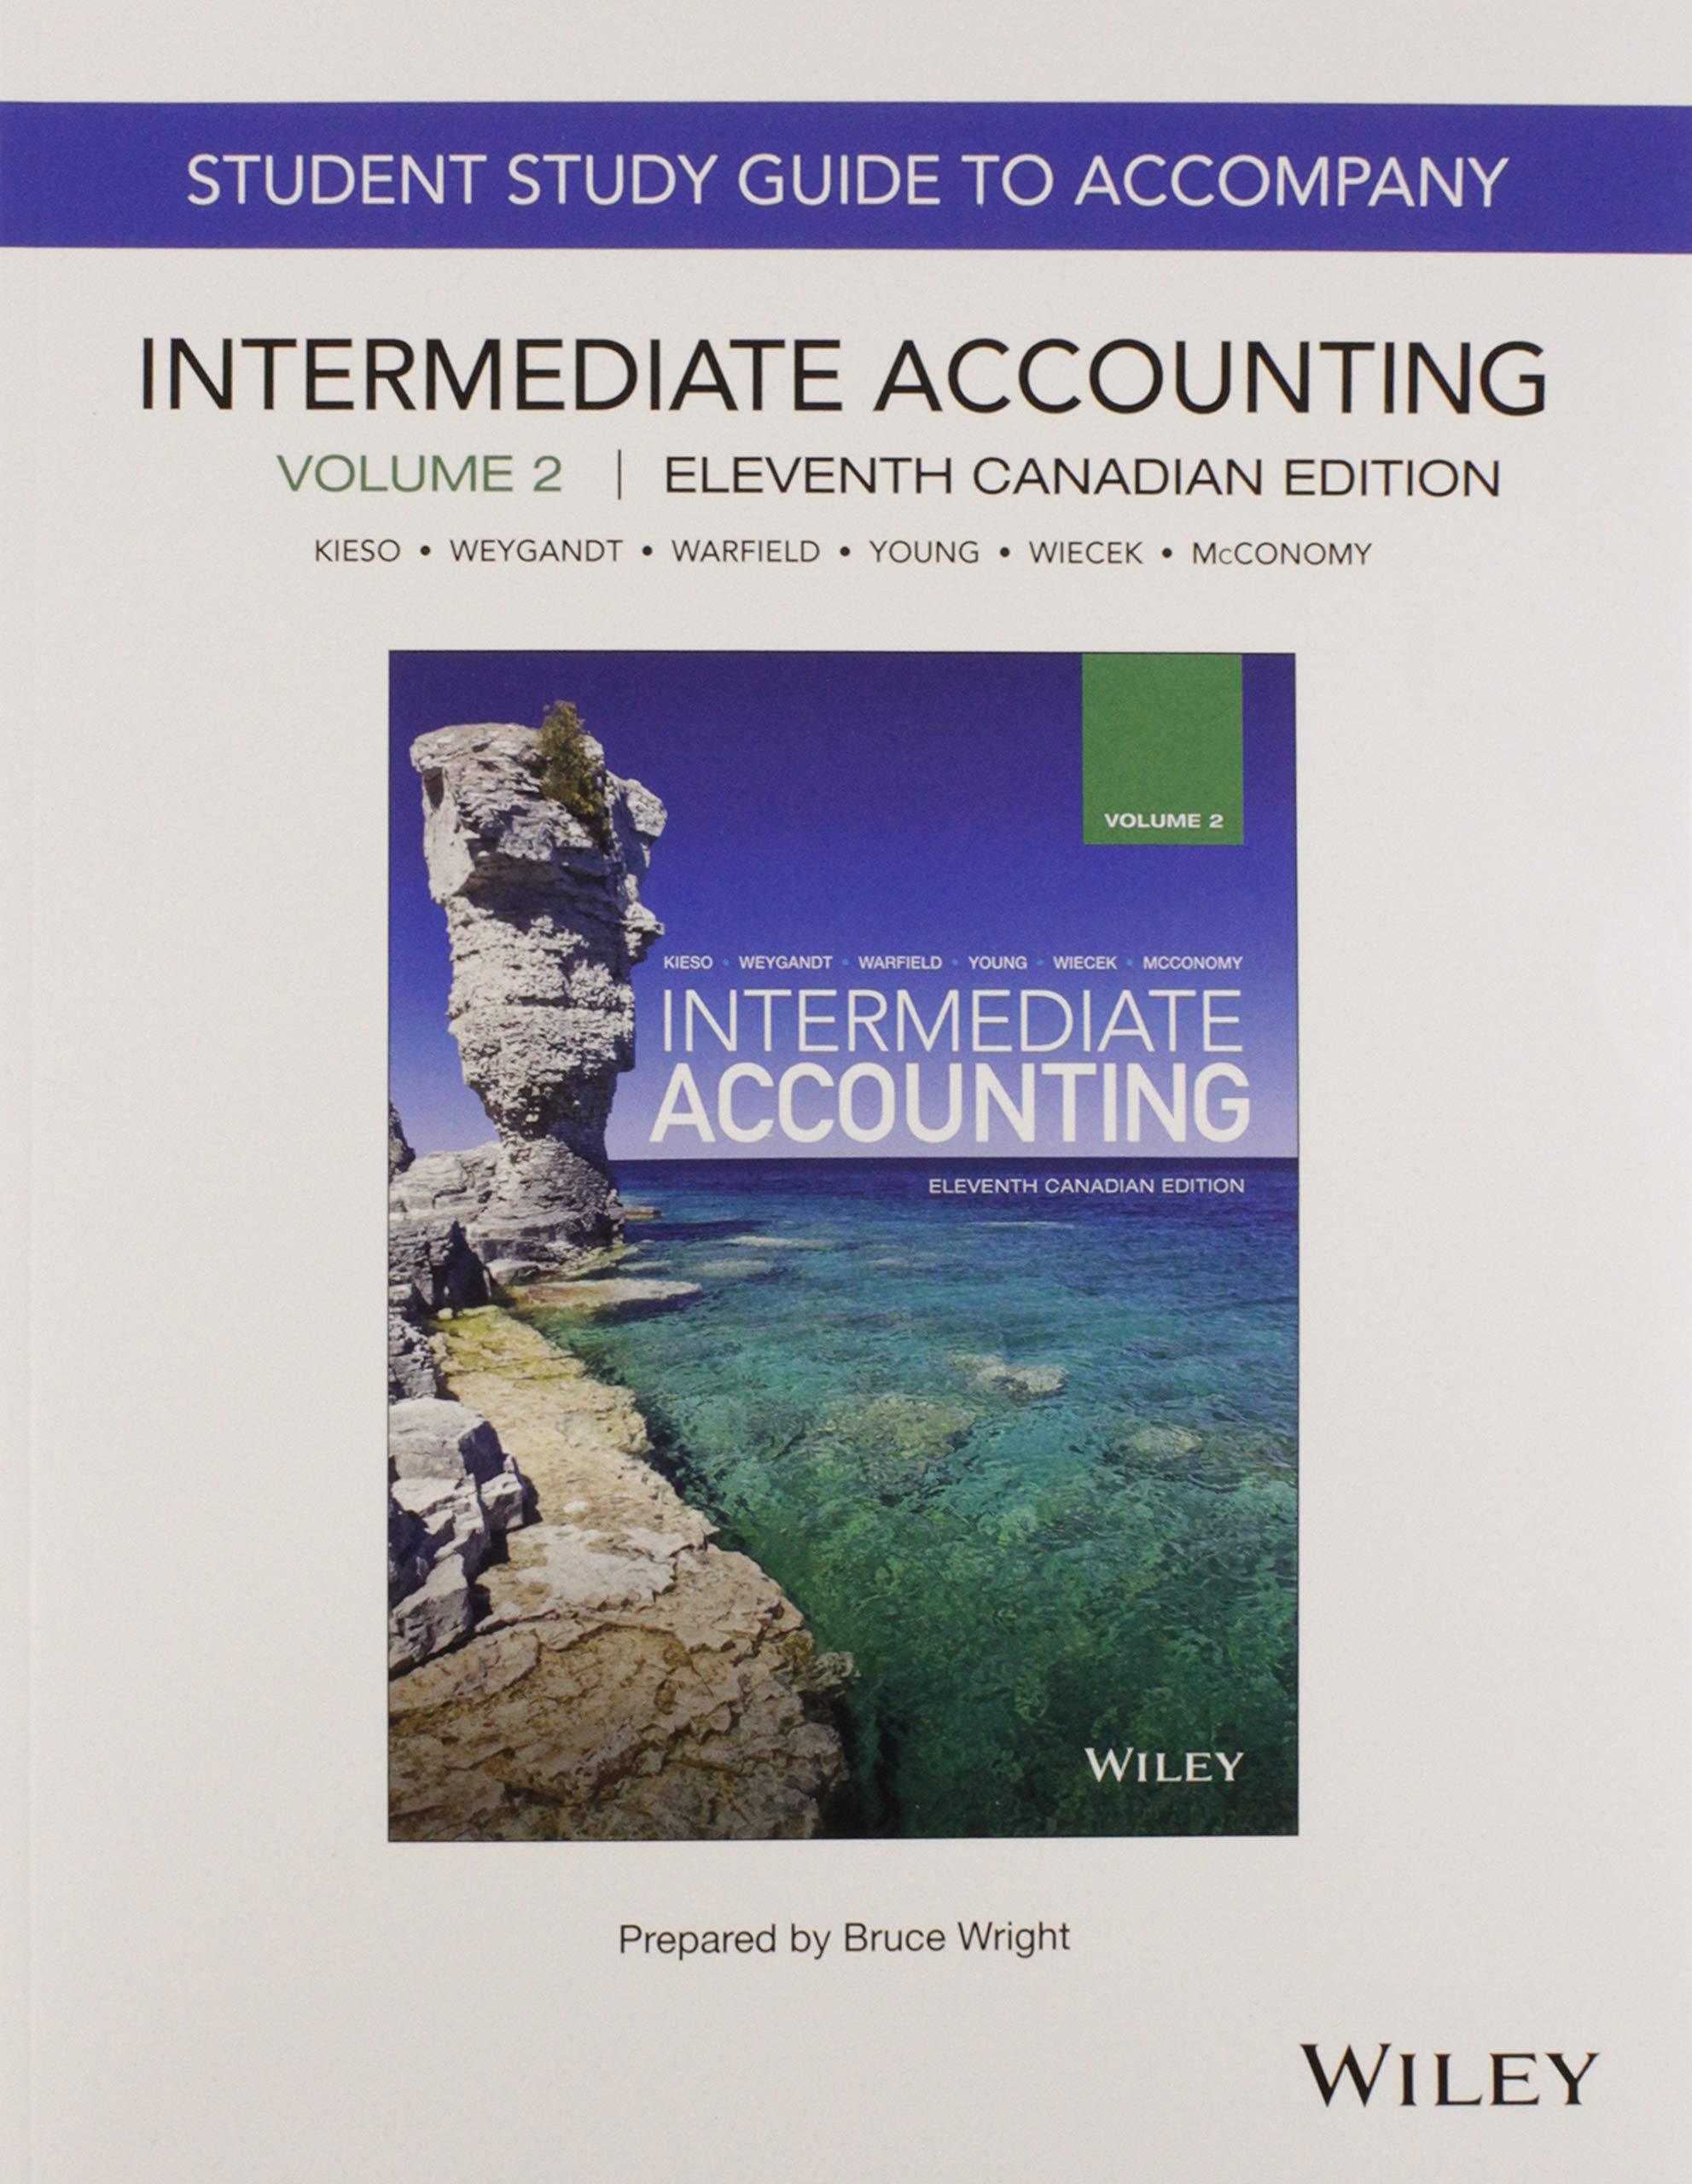 study guide intermediate accounting volume 2 11th canadian edition donald e. kieso, jerry j. weygandt, terry